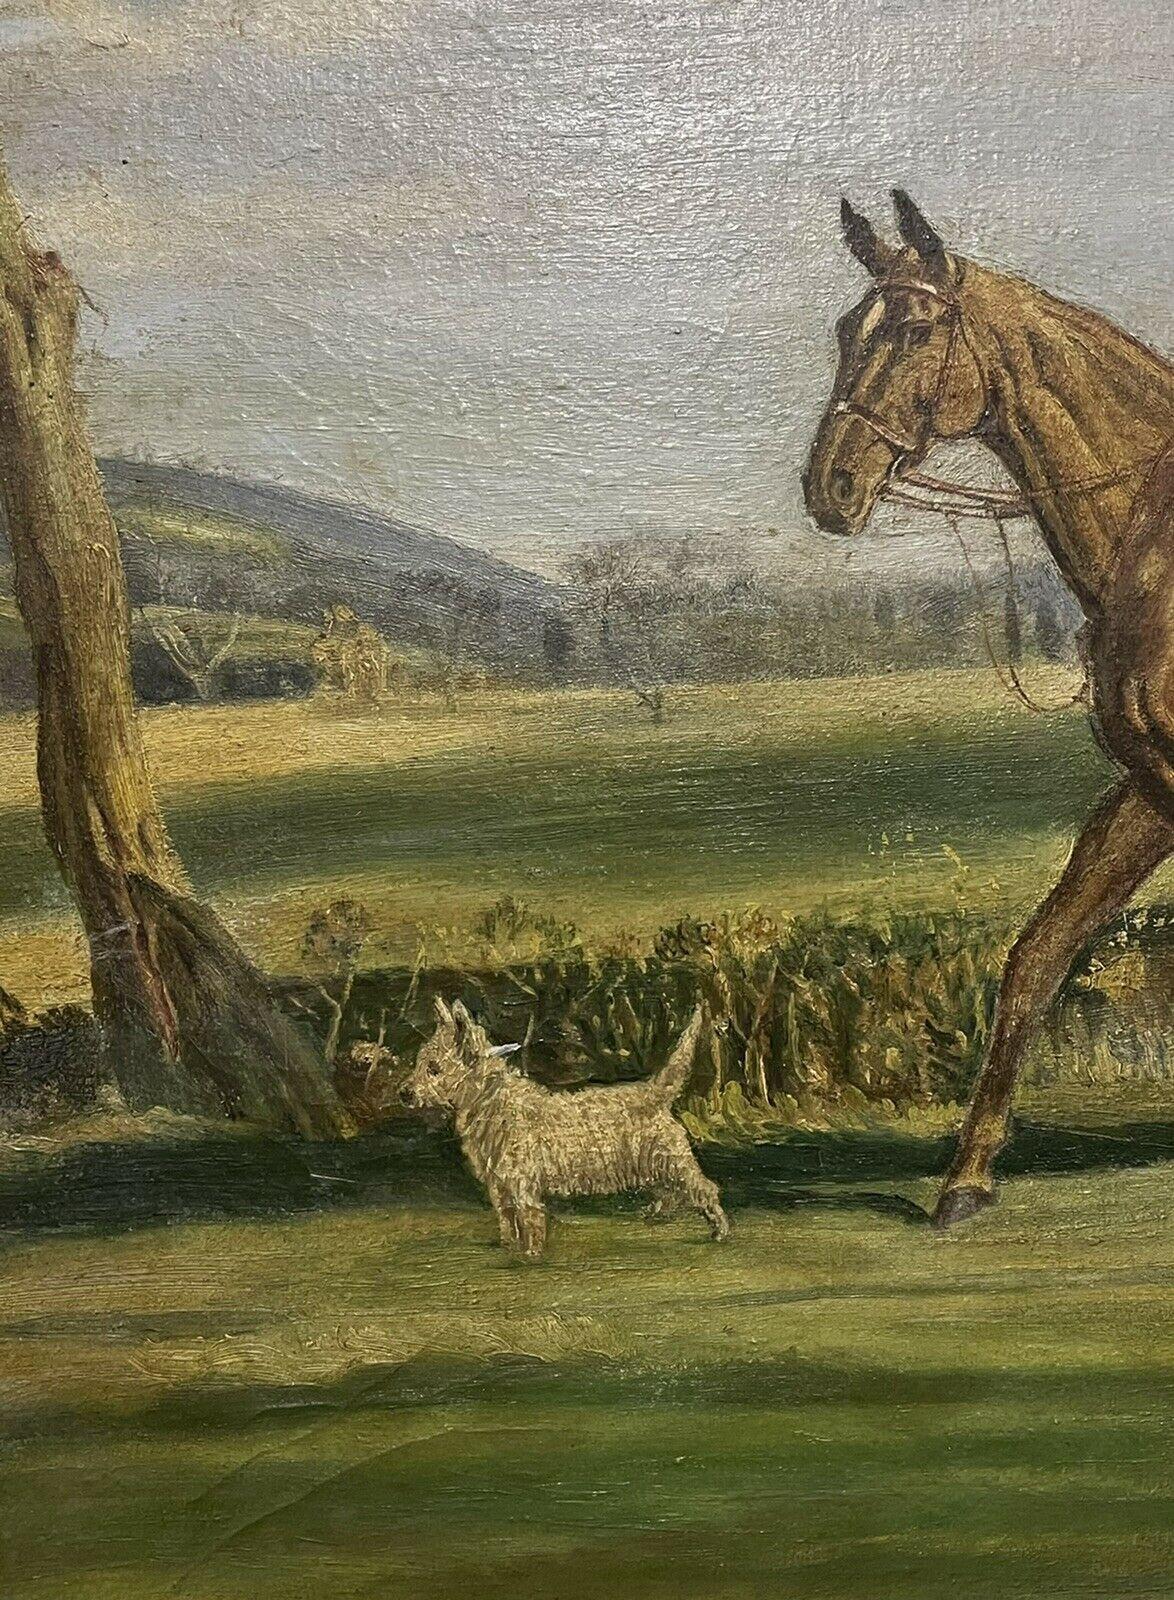 Young Lady on Horse with West Highland Terrier Dog in Landscape, Signed Oil - Impressionist Painting by English Antique